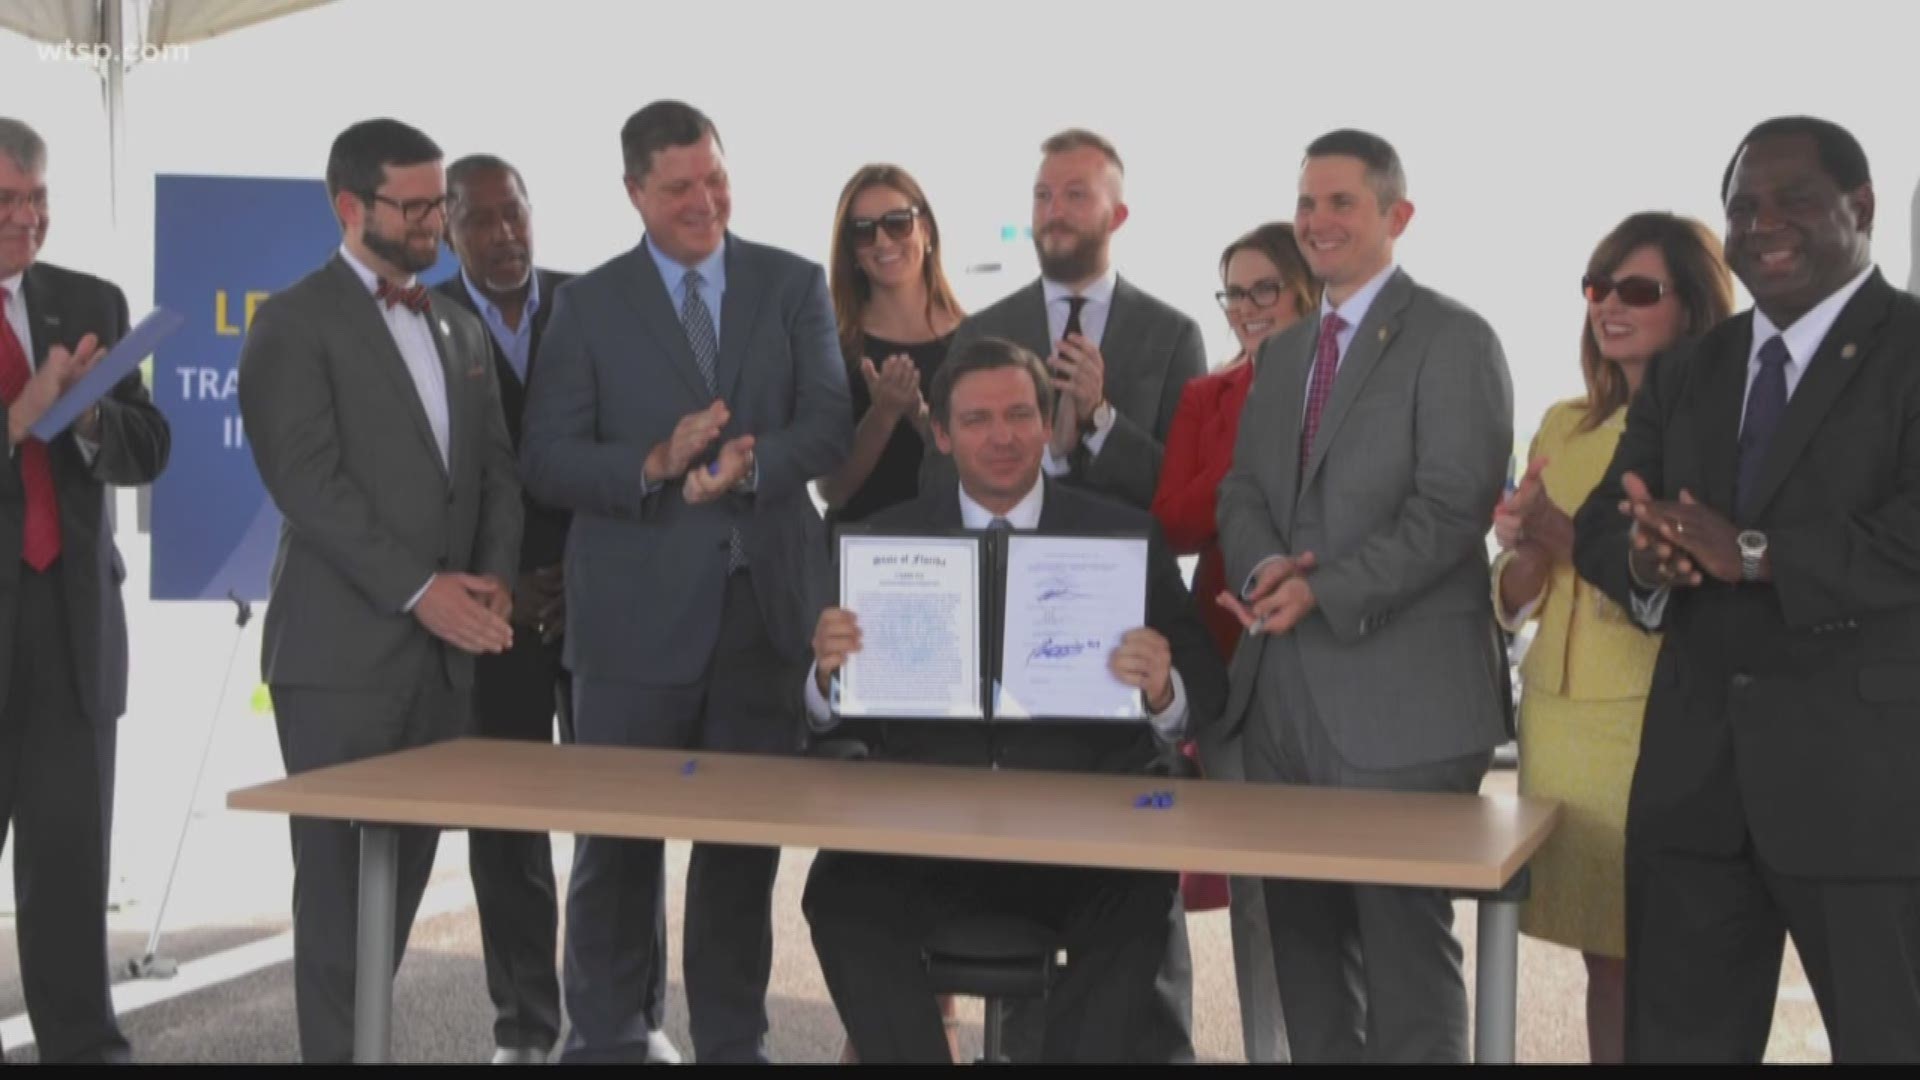 Self-driving vehicles with no humans on board will be able to operate in Florida — once they're finally ready for prime time — under a bill signed Thursday by Gov. Ron DeSantis.

DeSantis said he hopes to use the law to lure companies that test and build the cars. The measure, which takes effect July 1, also opens the door for on-demand ride companies such as Lyft and Uber to eventually deploy fleets of the vehicles in Florida. That does not mean, however, that such cars will appear on public streets around the state anytime soon. Self-driving vehicles without a human operator are largely still in the testing stage.